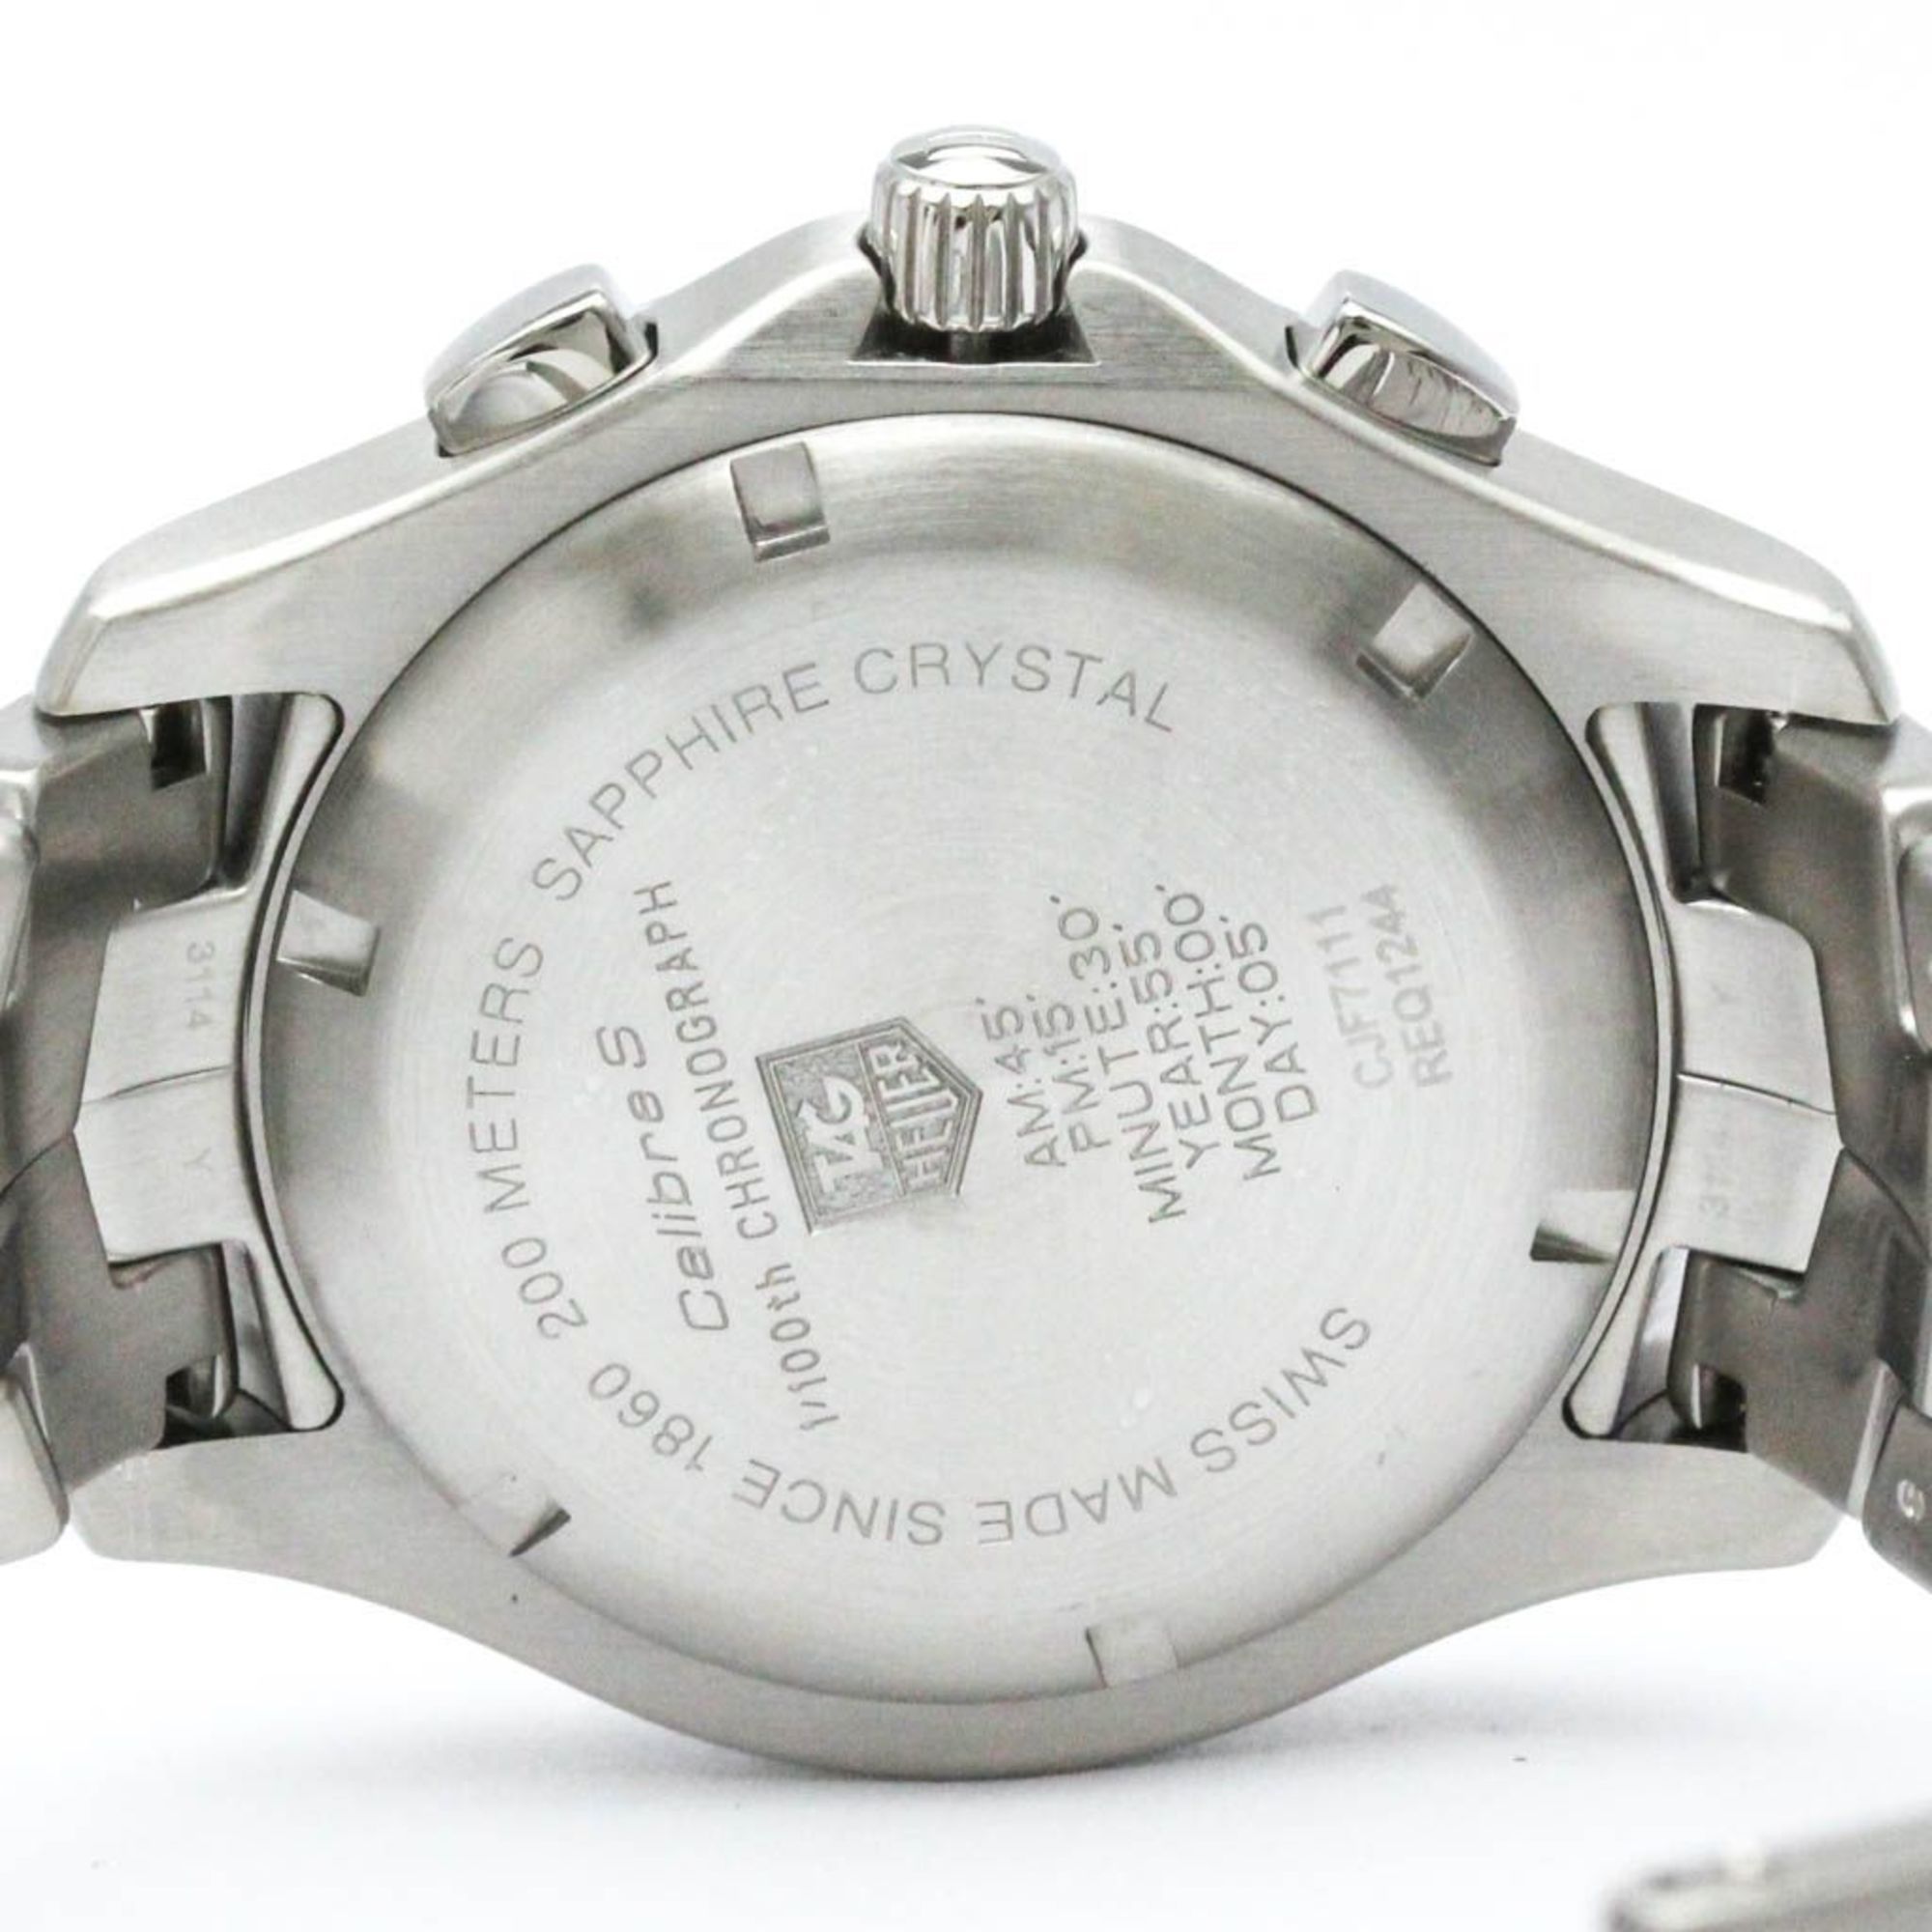 Polished TAG HEUER Link Stainless Steel Quartz Mens Watch CJF7111 BF561326